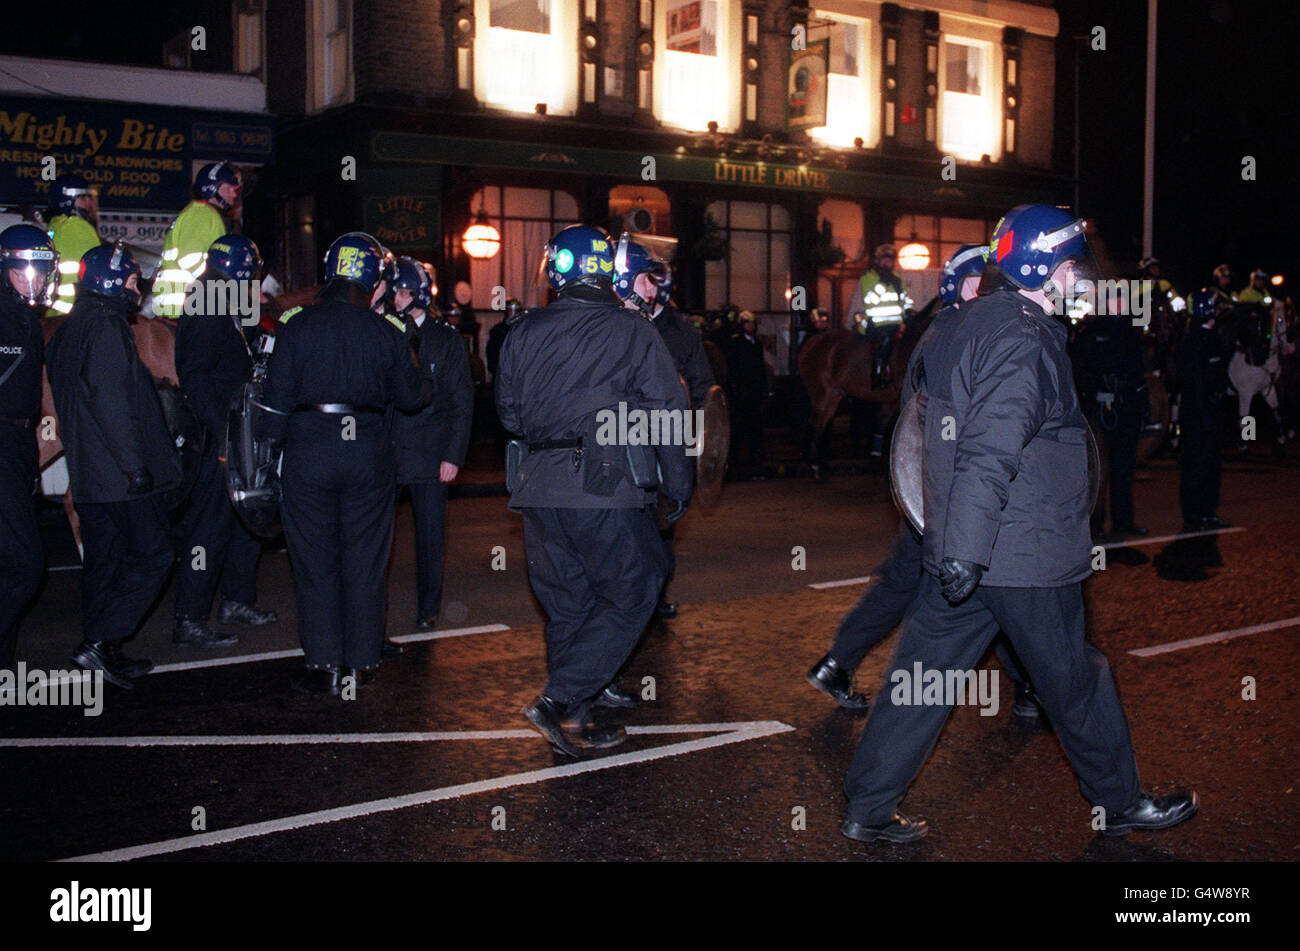 Police riot gear standby outside an East London pub, the Litter Driver, in Bow, which has been occupied by a group of skinheads. Stock Photo